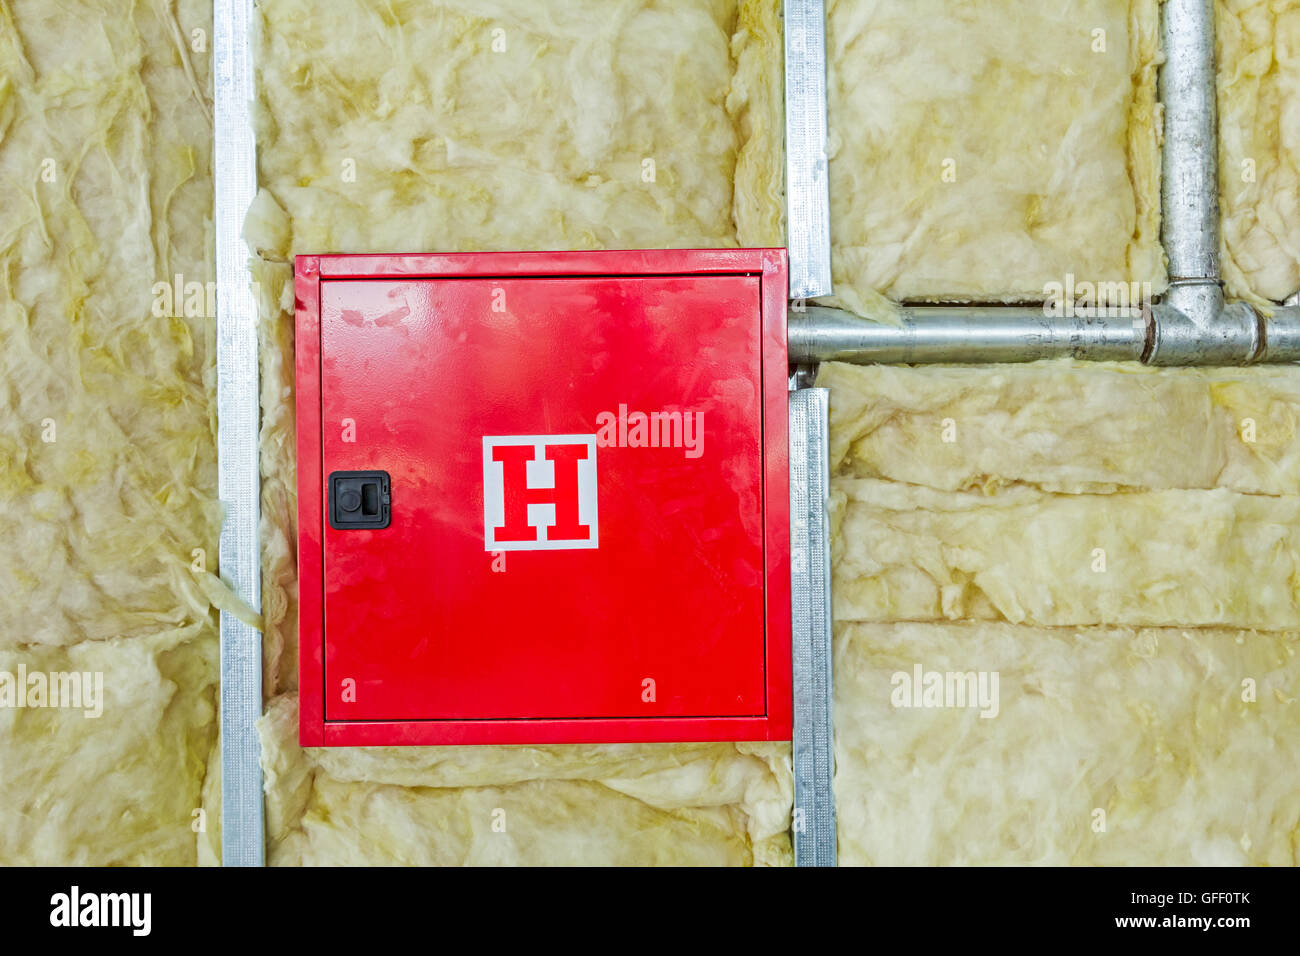 Front side of fire box with symbol for hydrant in an unfinished party wall. Stock Photo